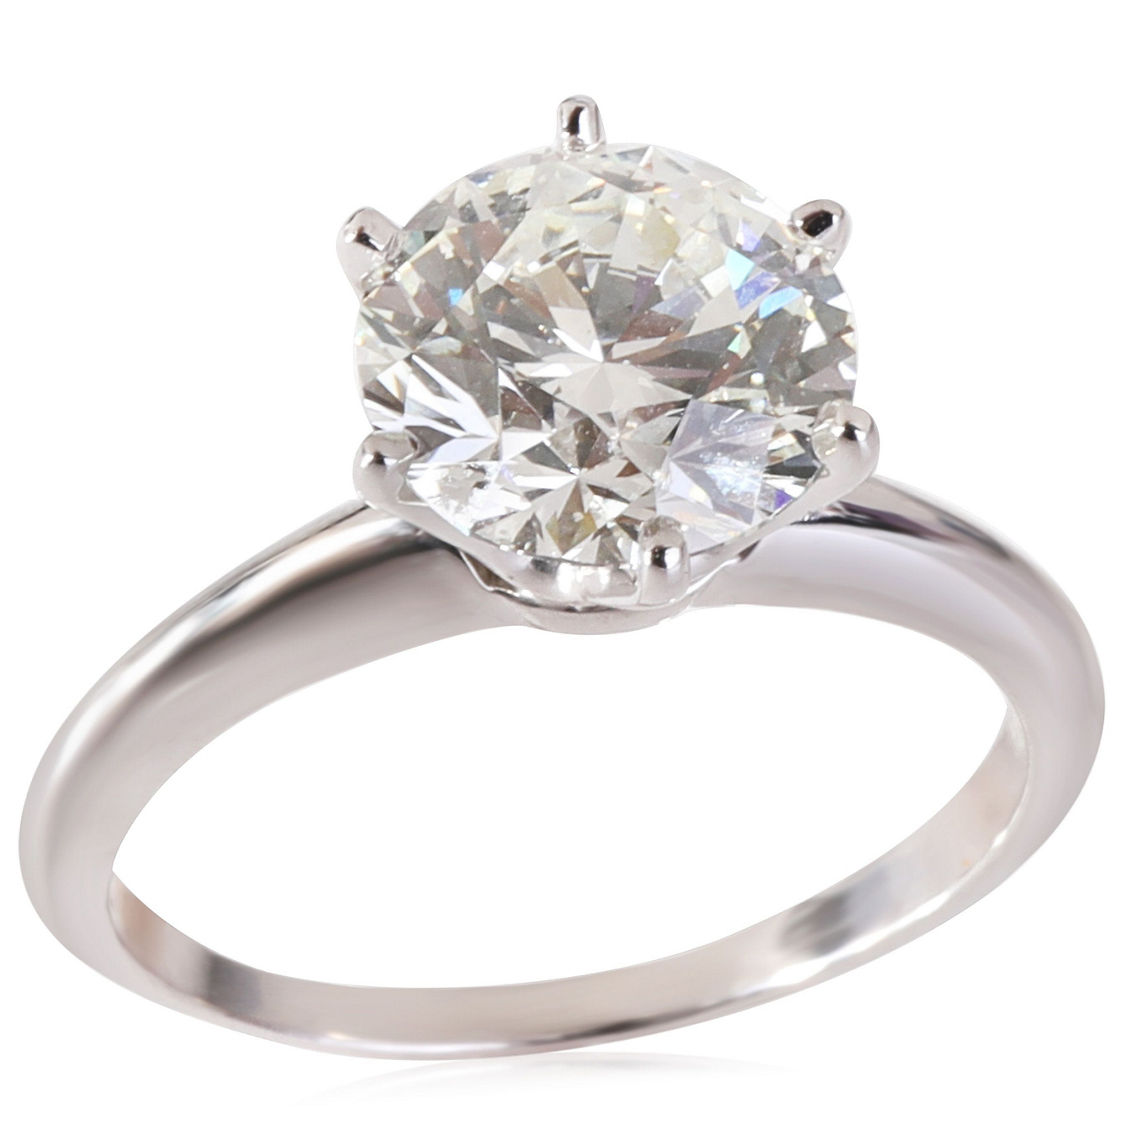 Tiffany & Co. Diamond Engagement Ring in Platinum I VS1 2.17 CTW Pre-Owned - Image 3 of 4